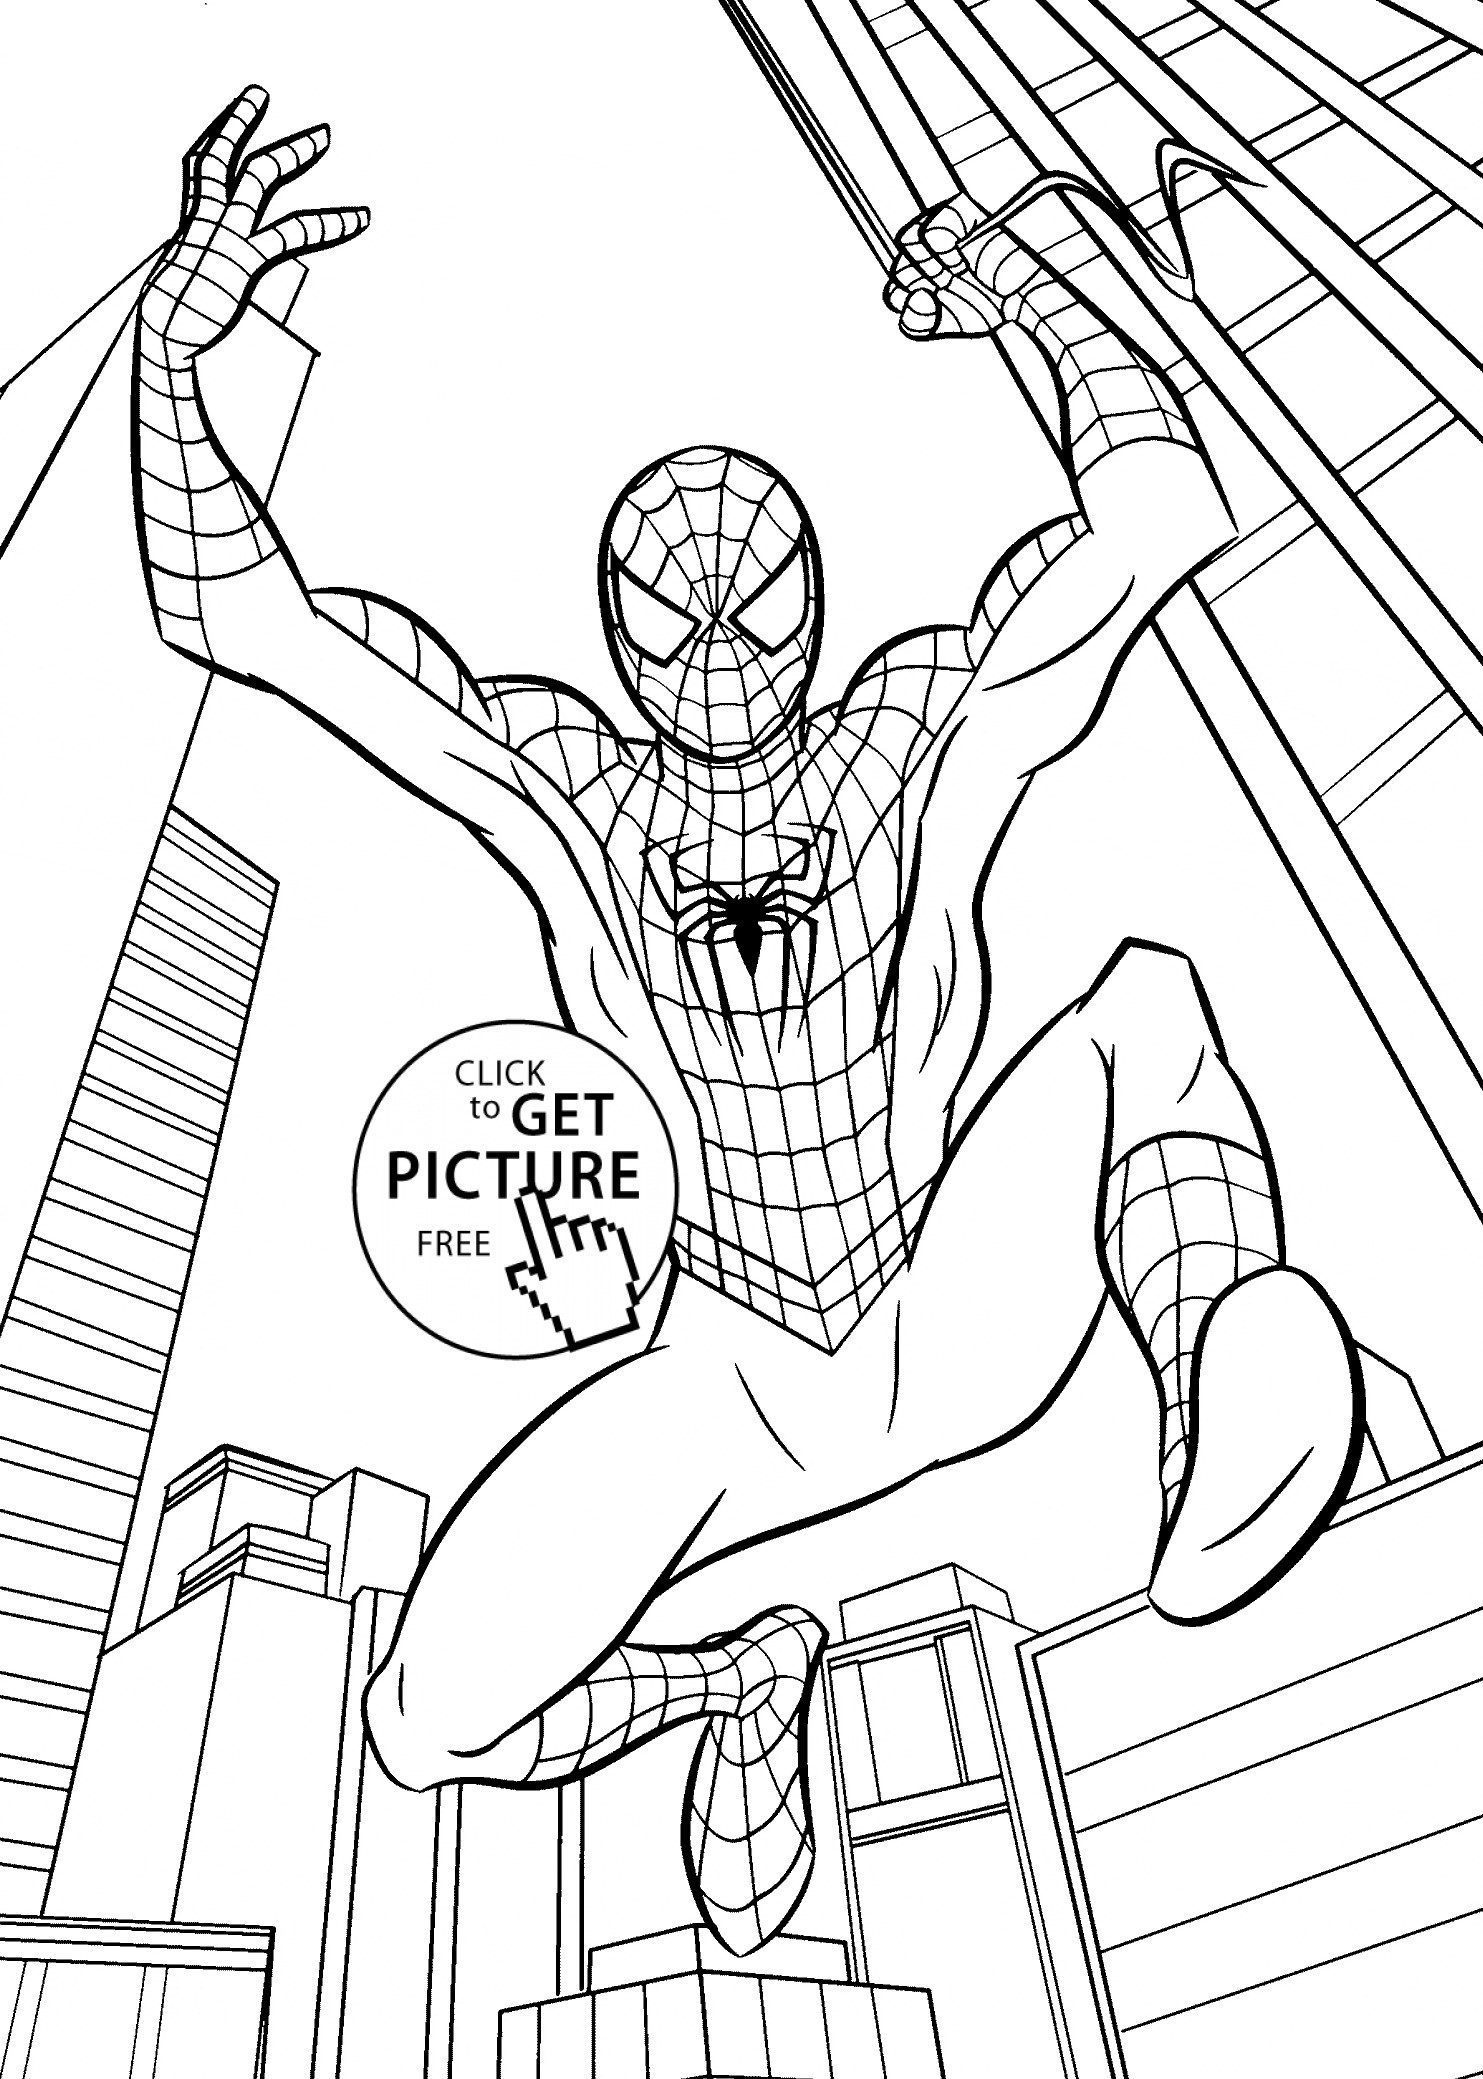 Easy Spiderman Pictures To Draw Free Printable Spiderman Coloring - Free Printable Spiderman Coloring Pages